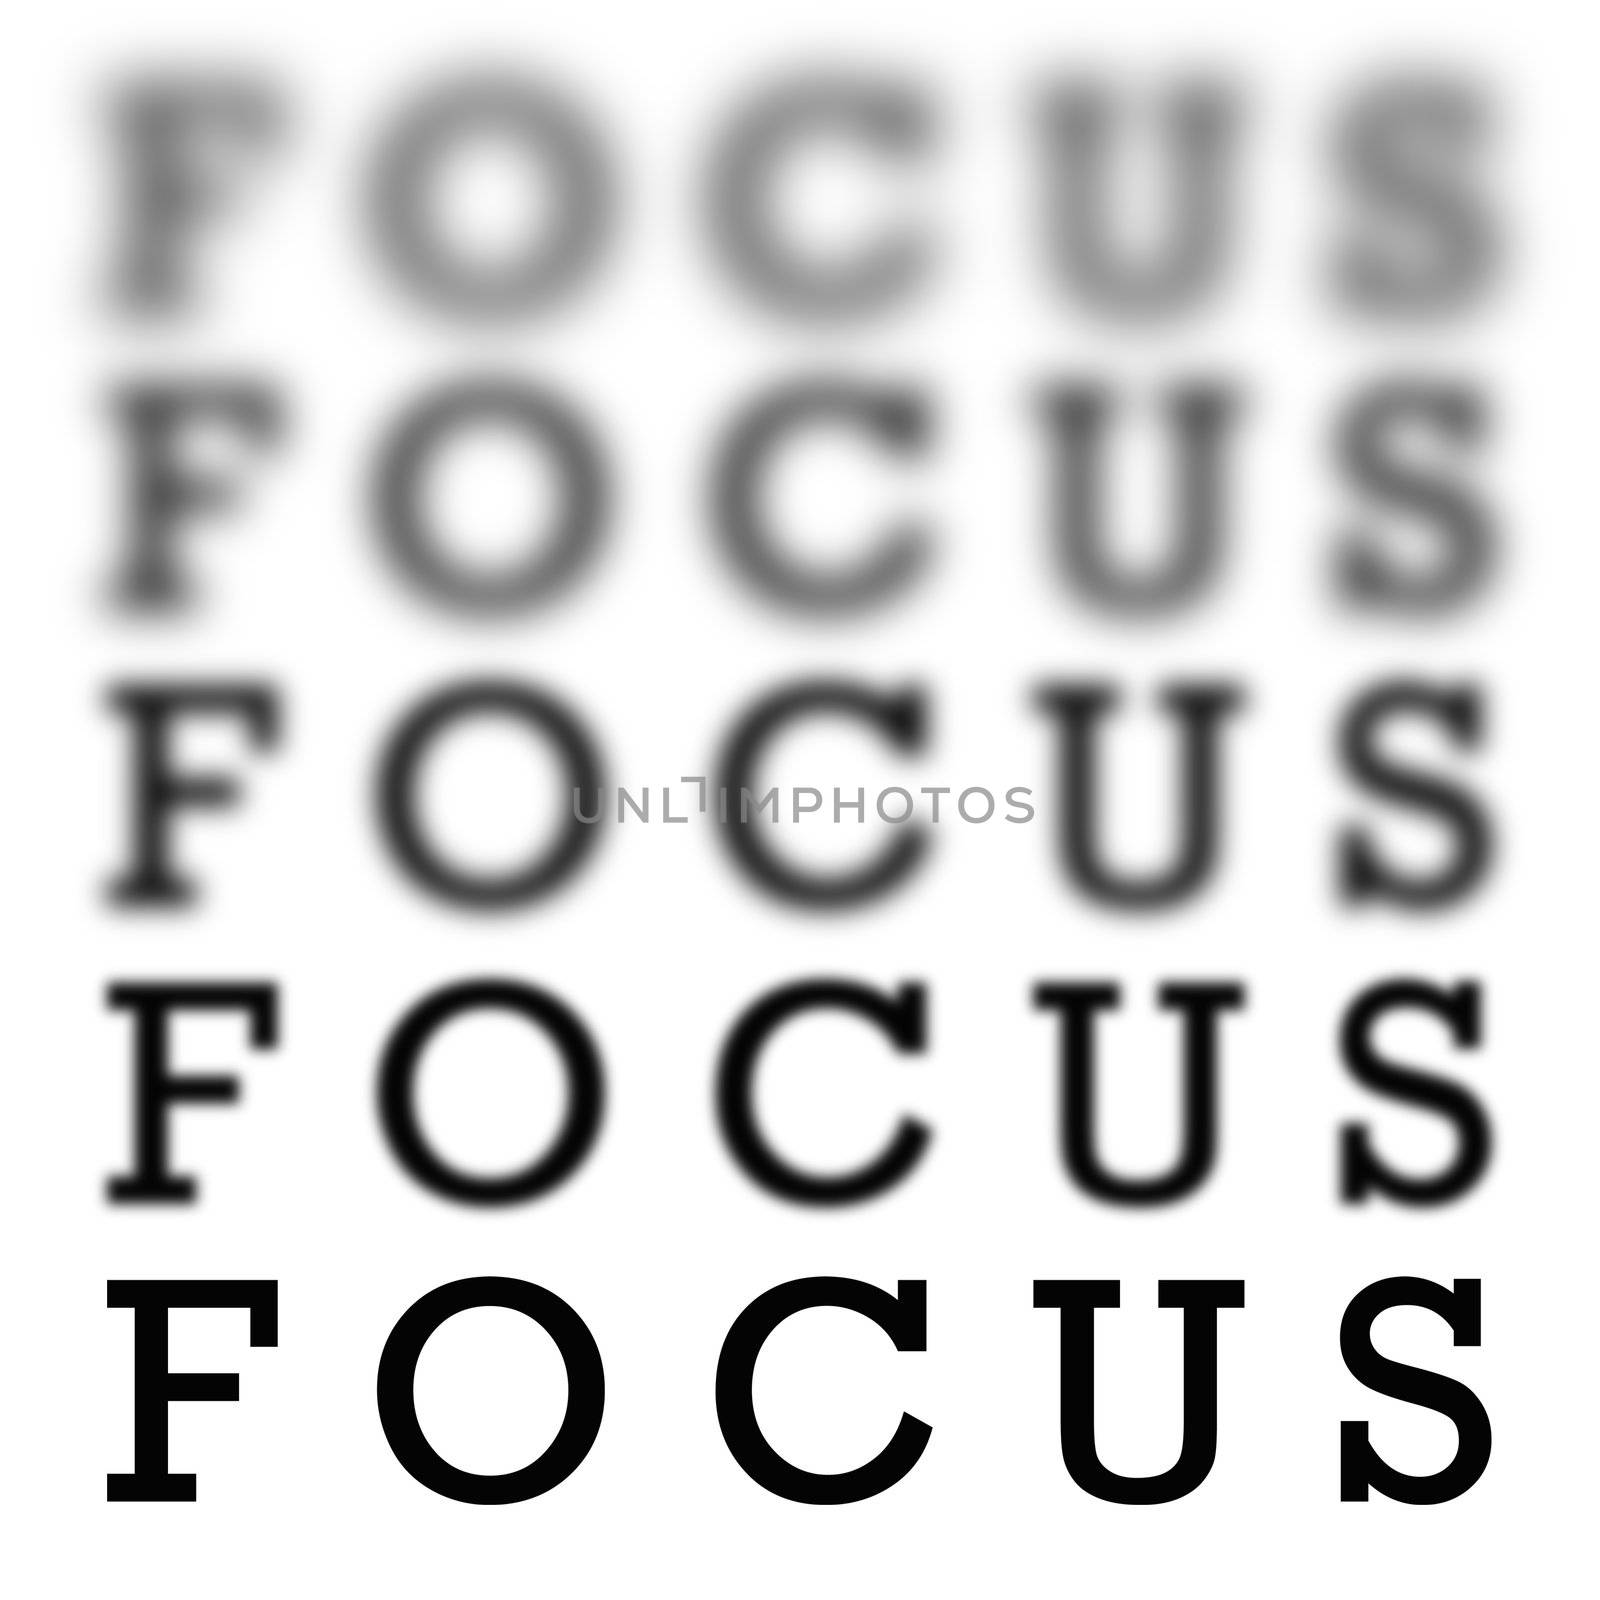 The word focus in 5 different  variations of blurriness and sharpness isolated over white.